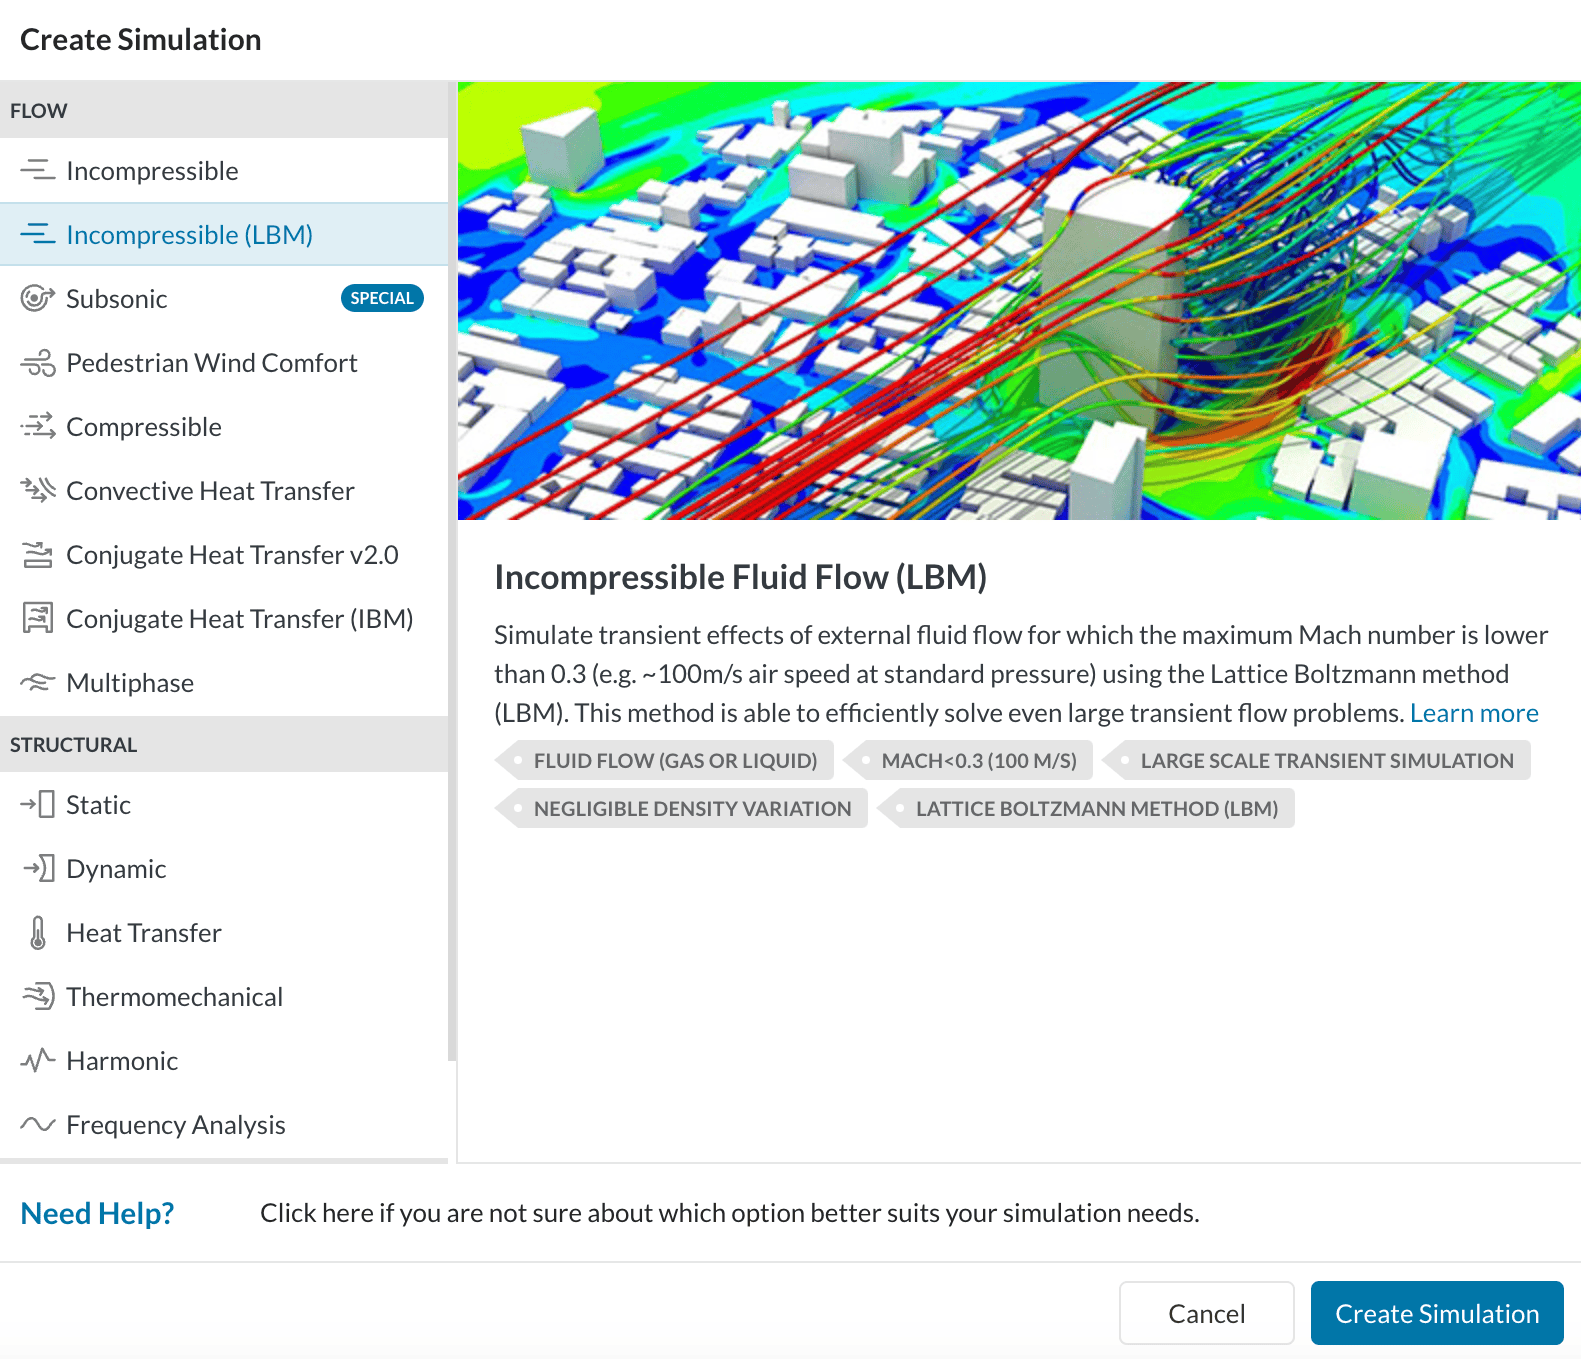 SimScale's analysis type window showing the Incompressible Fluid Flow (LBM) in selection